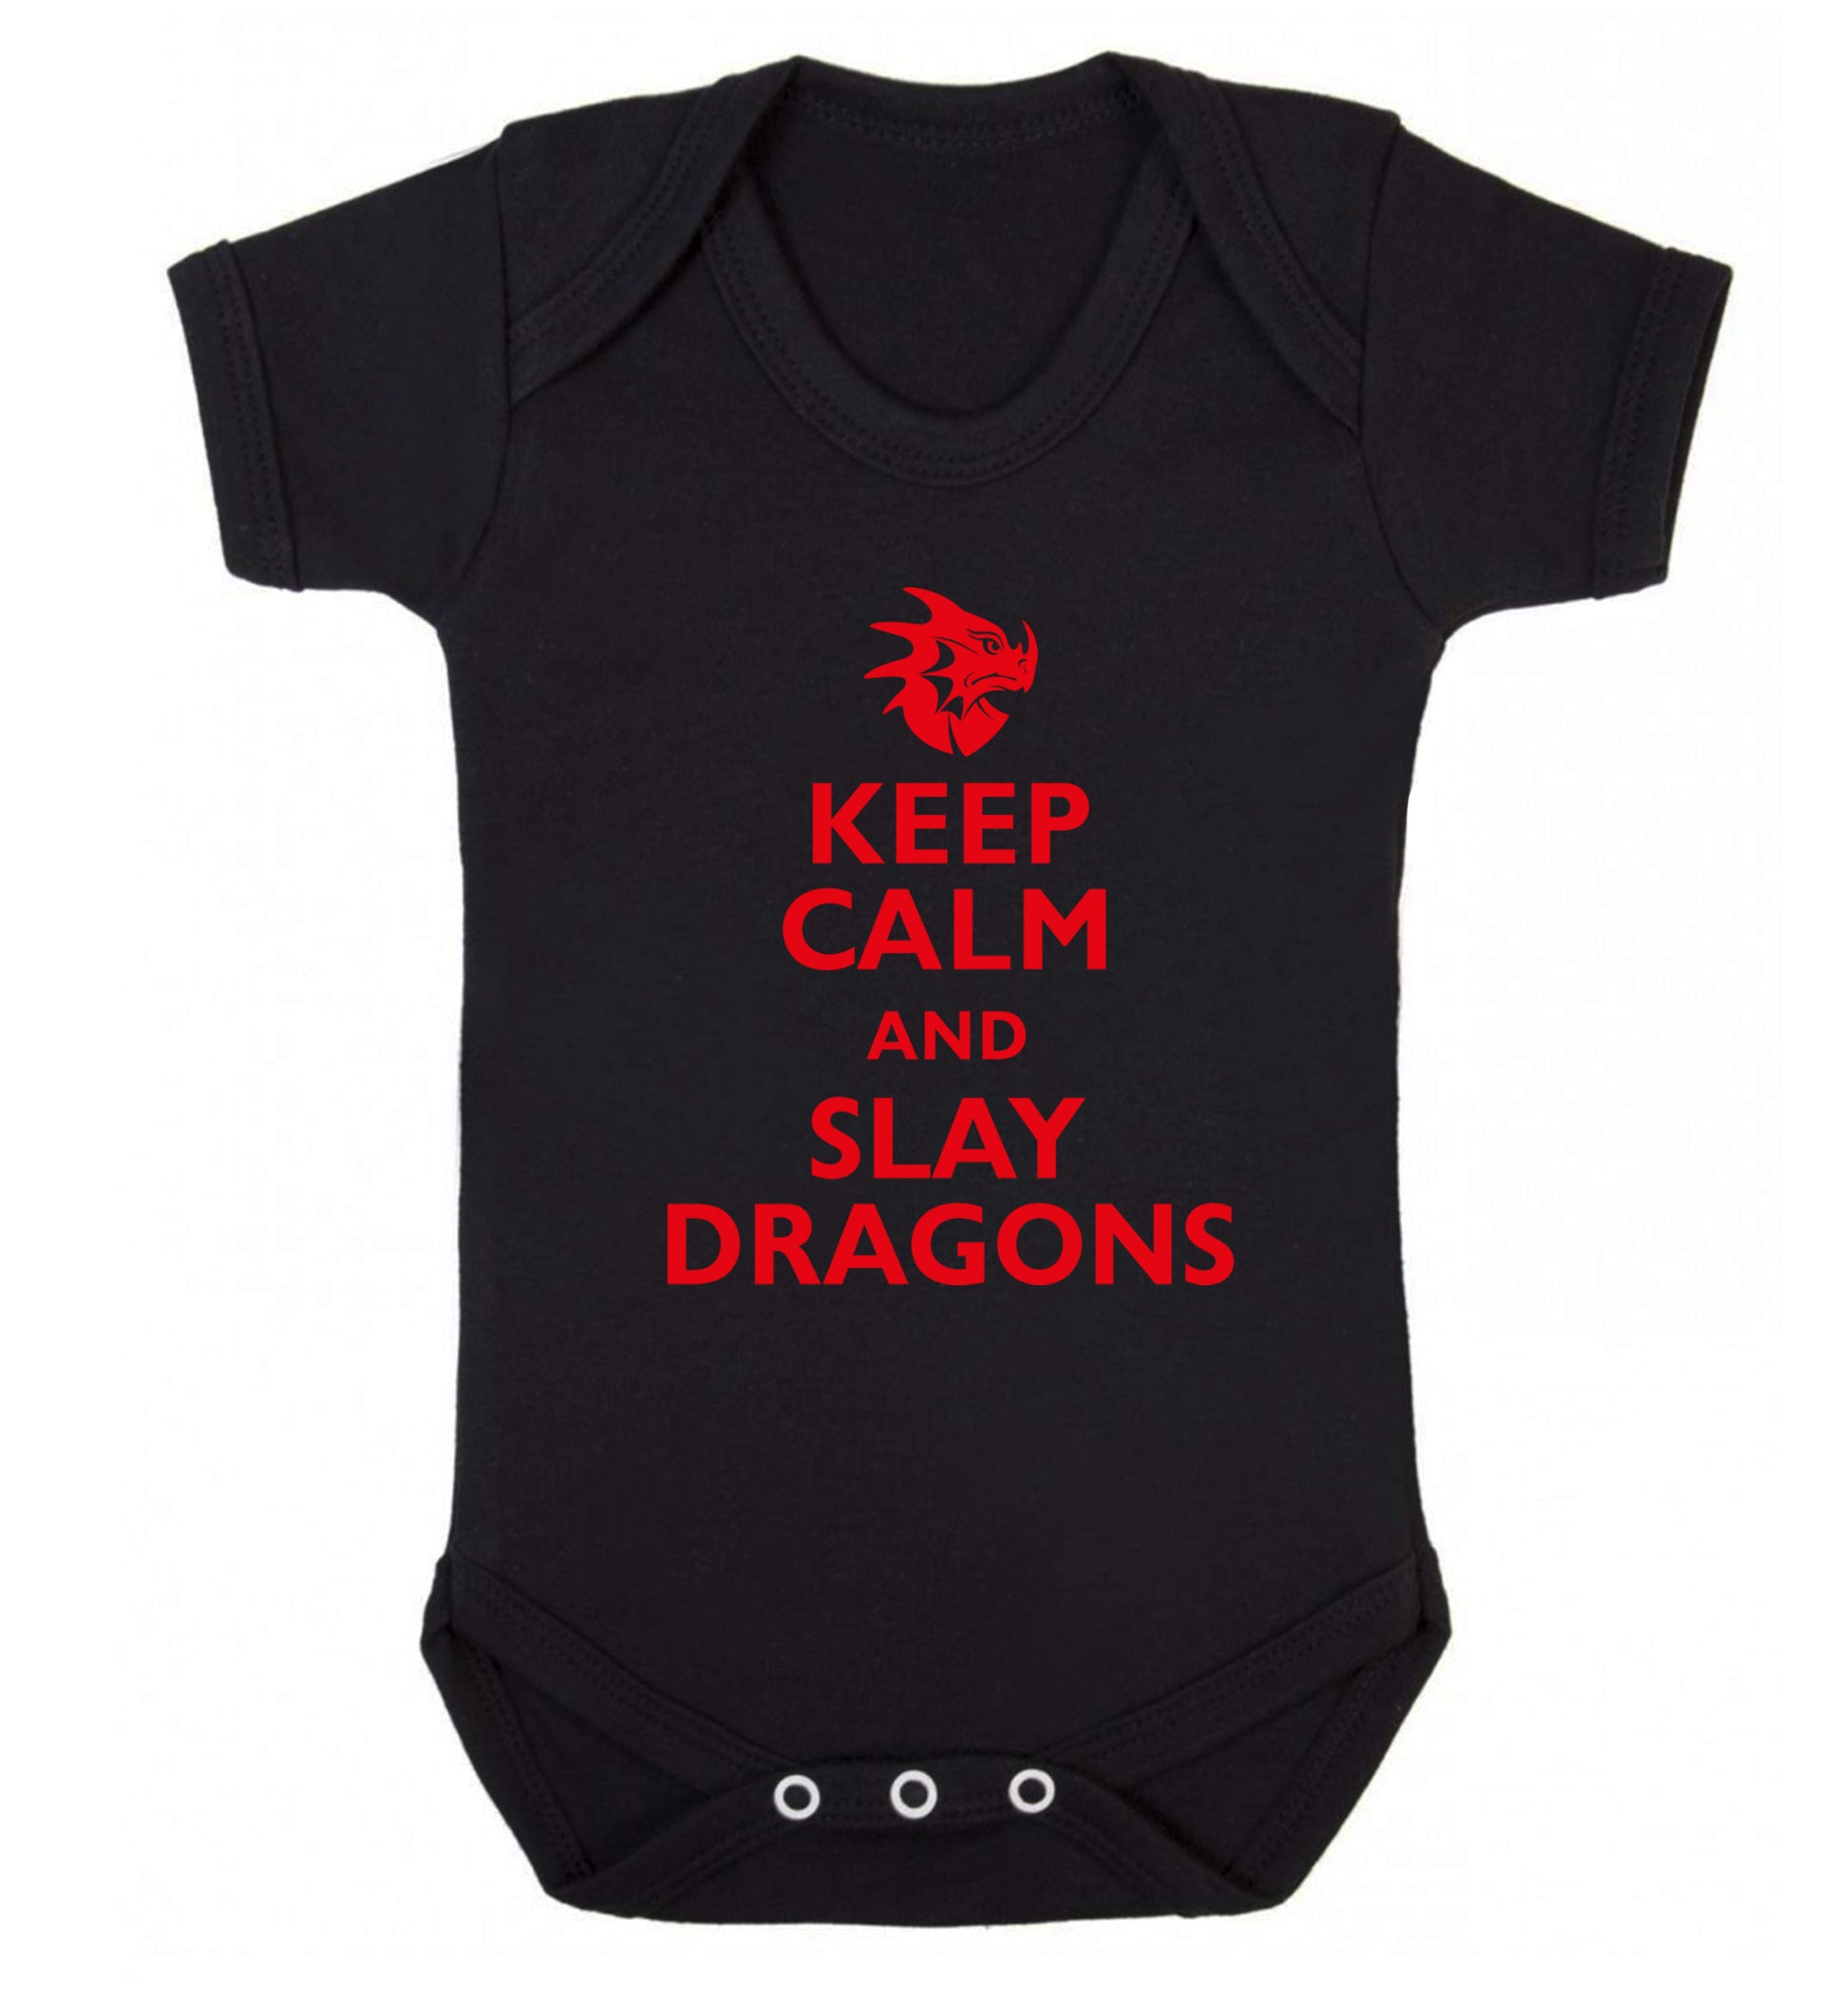 Keep calm and slay dragons Baby Vest black 18-24 months